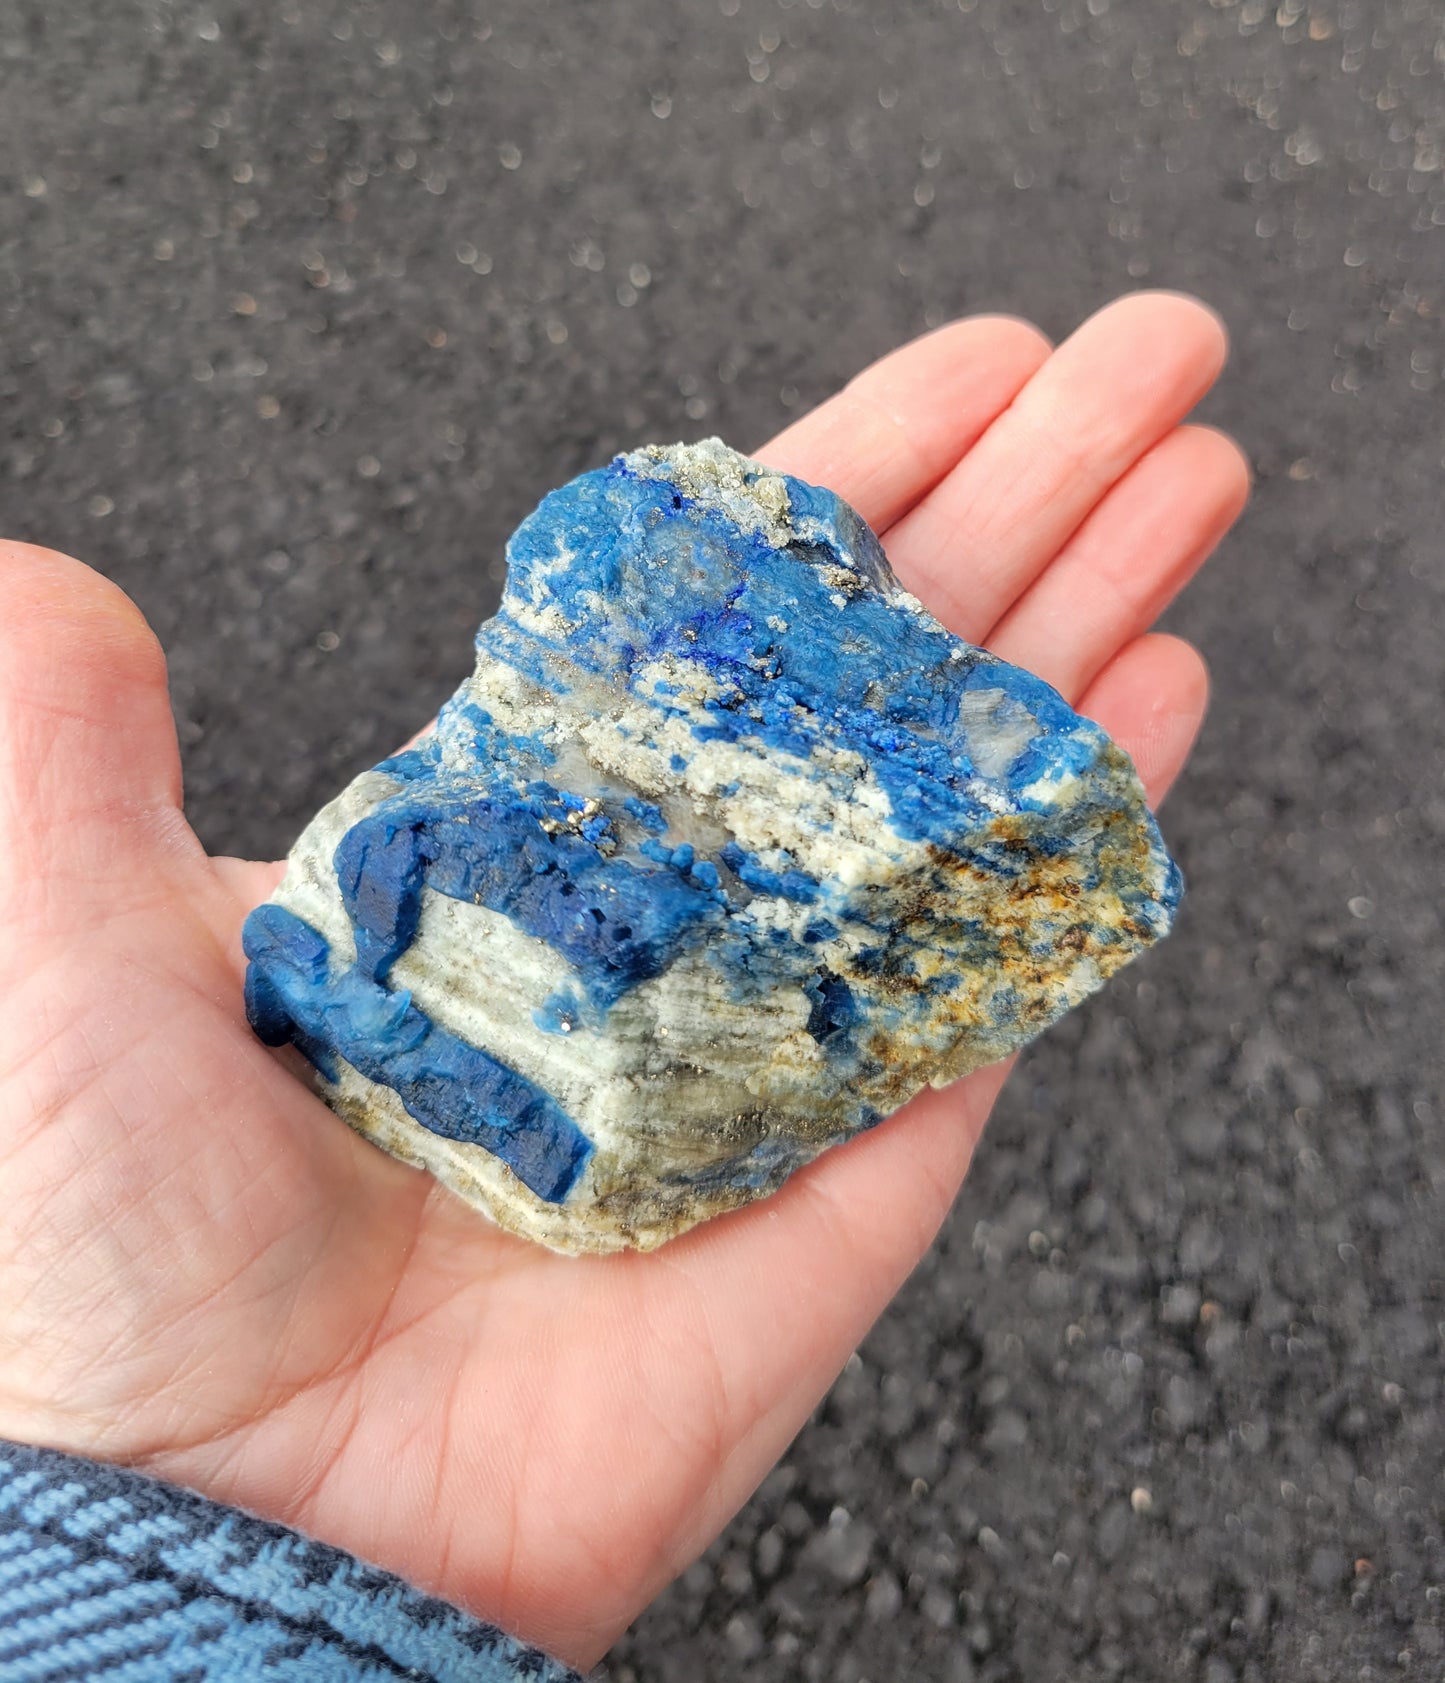 Afghanite, Lazulite and Pyrite from Pakistan from Pakistan (3 X 3 1/8 X 1 3/8 inches)